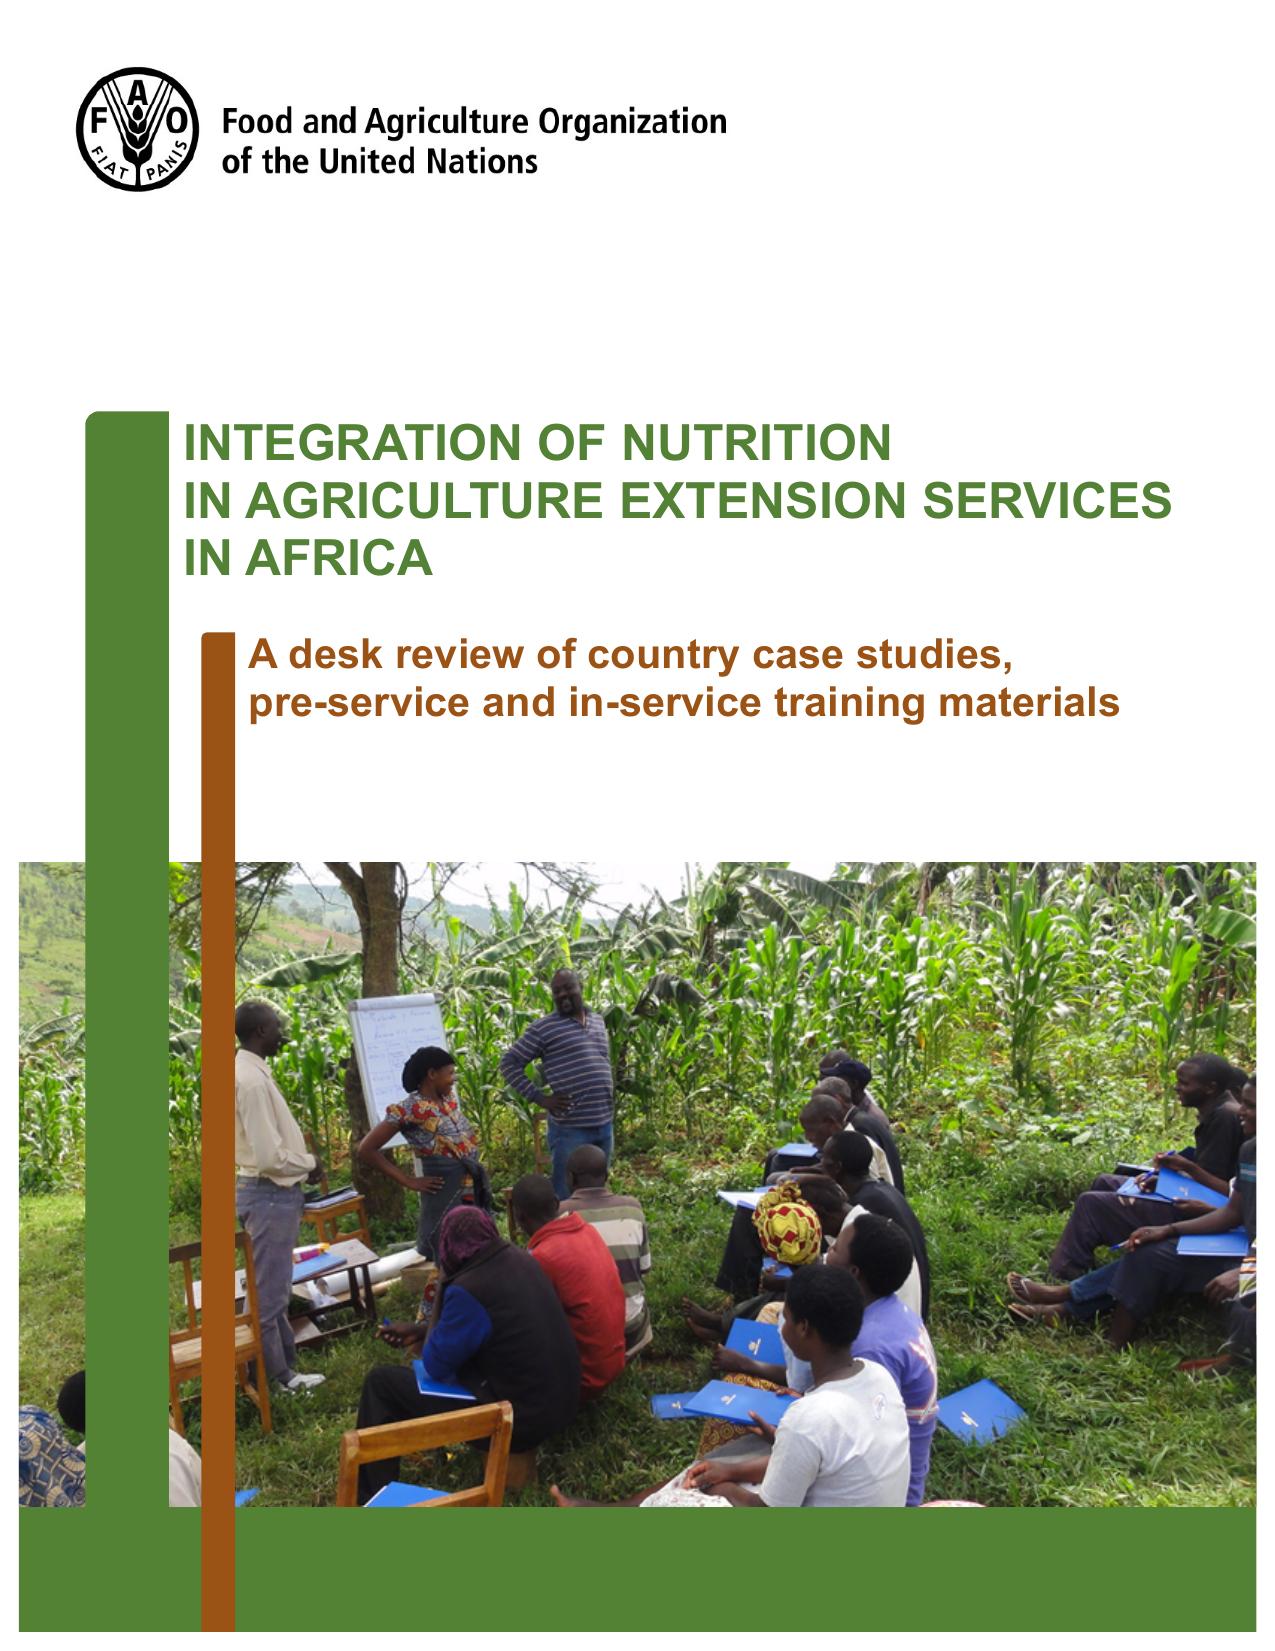 Integration of nutrition in agriculture extension services in Africa